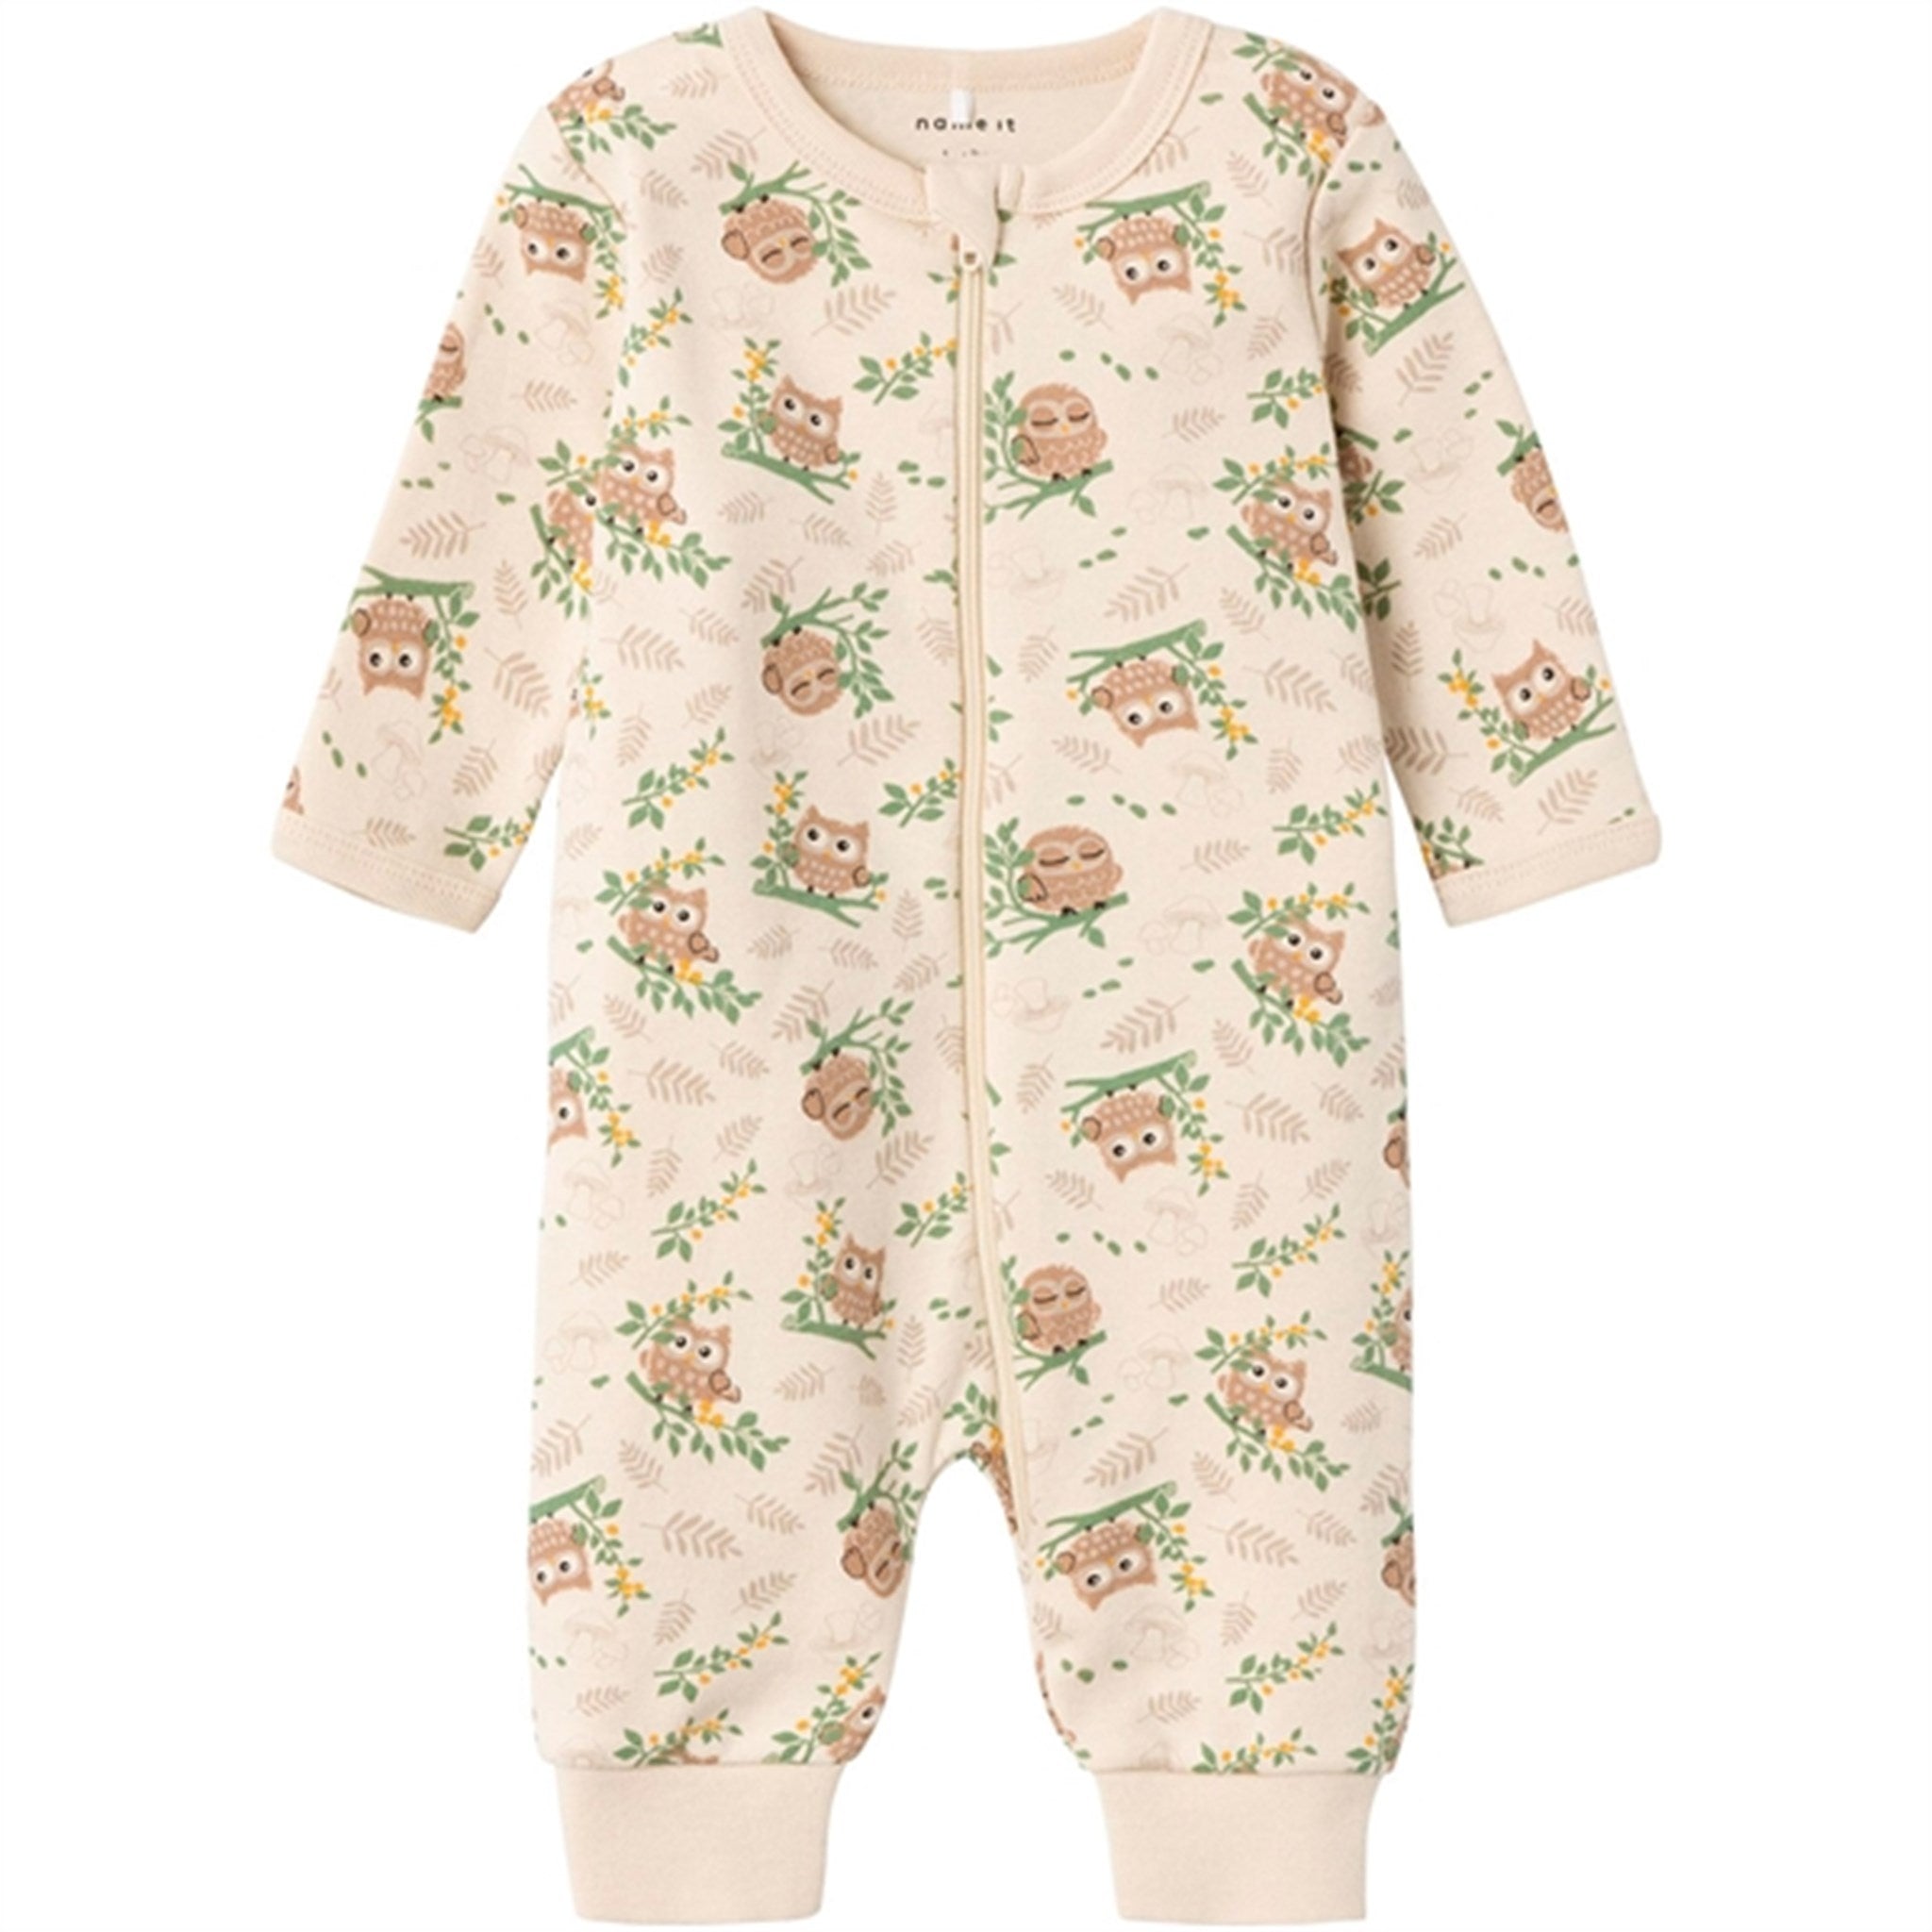 Name it Fog Owl Nightsuit with Zipper